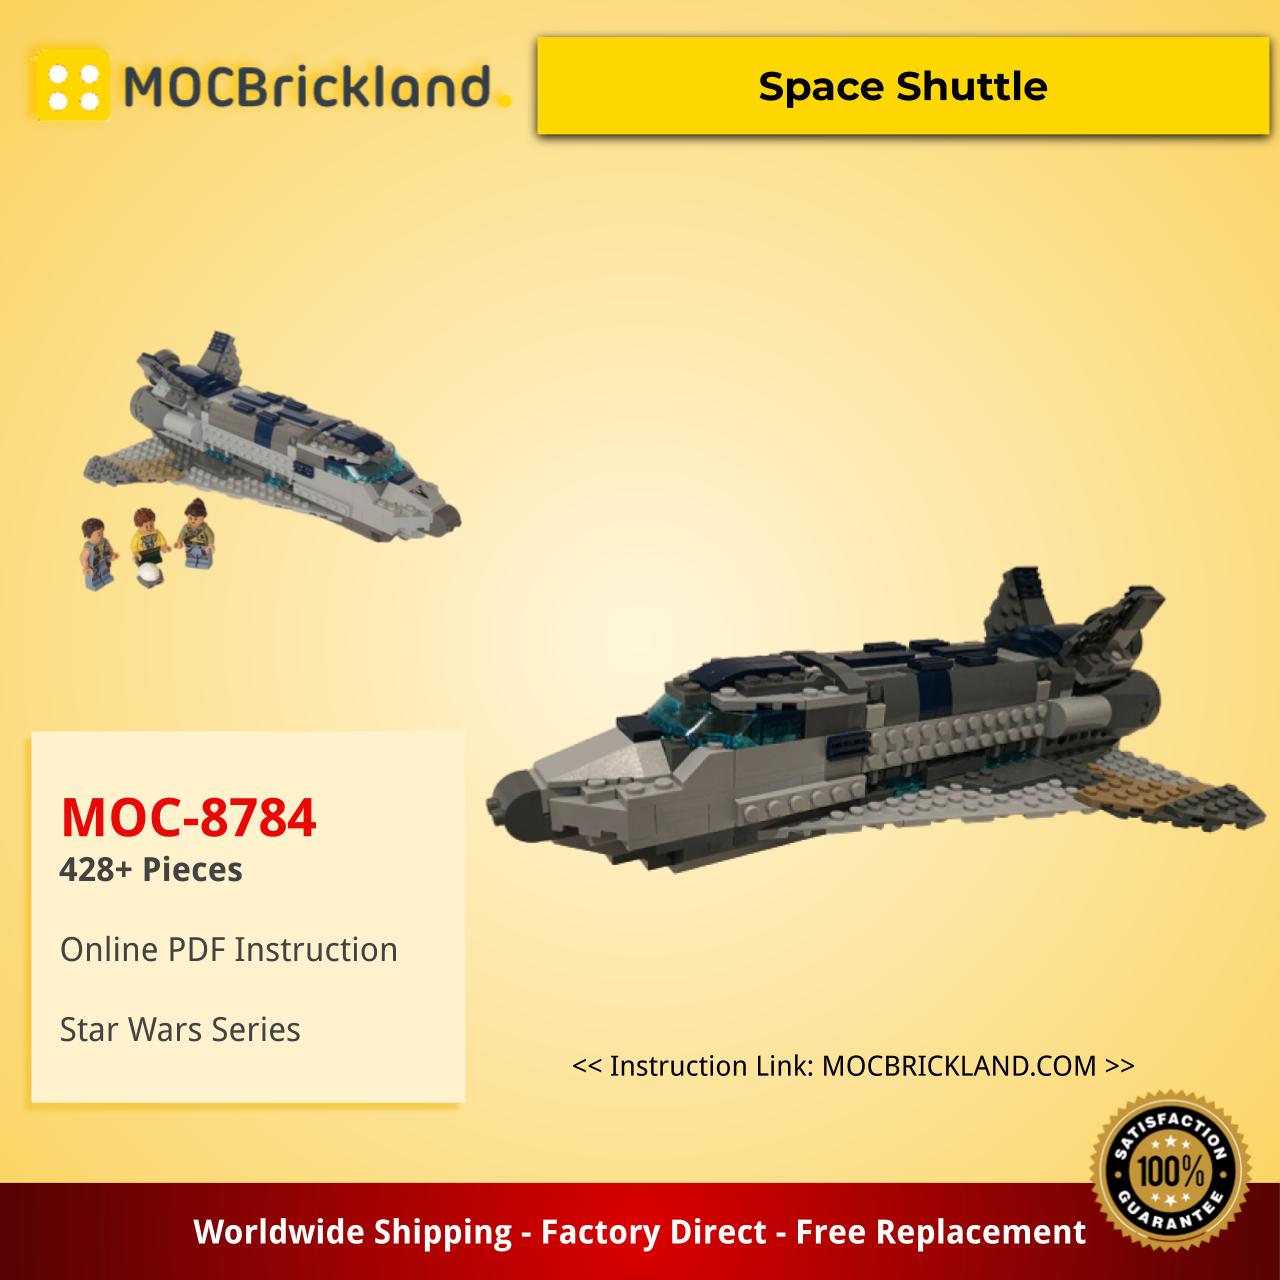 Star Wars MOC-8784 Space Shuttle by Tomik MOCBRICKLAND 